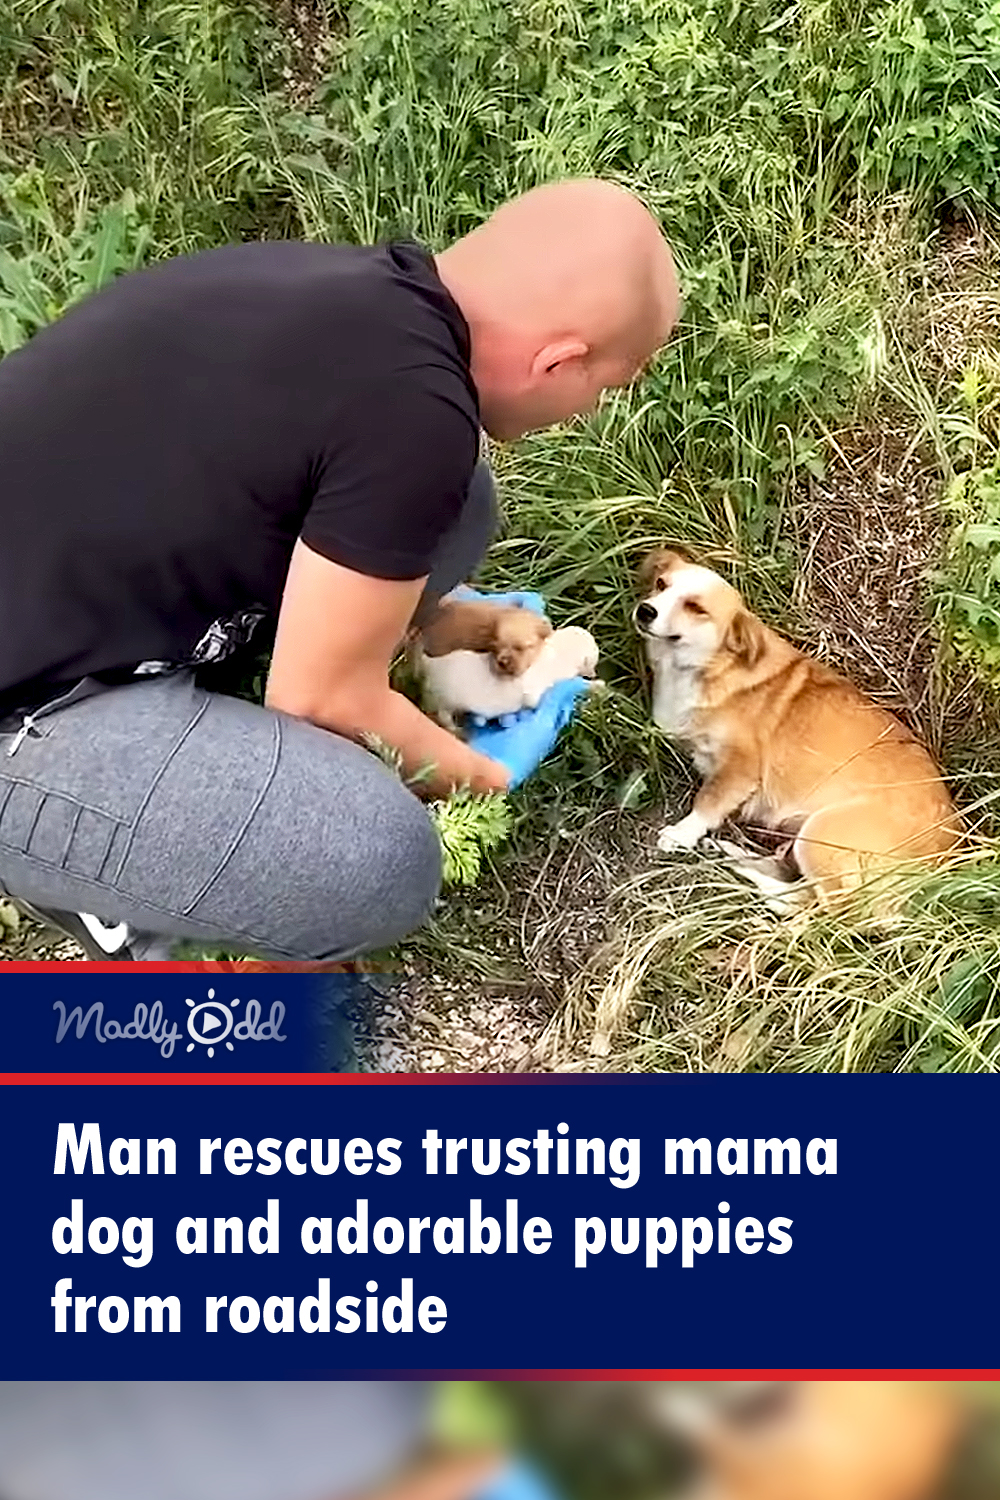 Man rescues trusting mama dog and adorable puppies from roadside